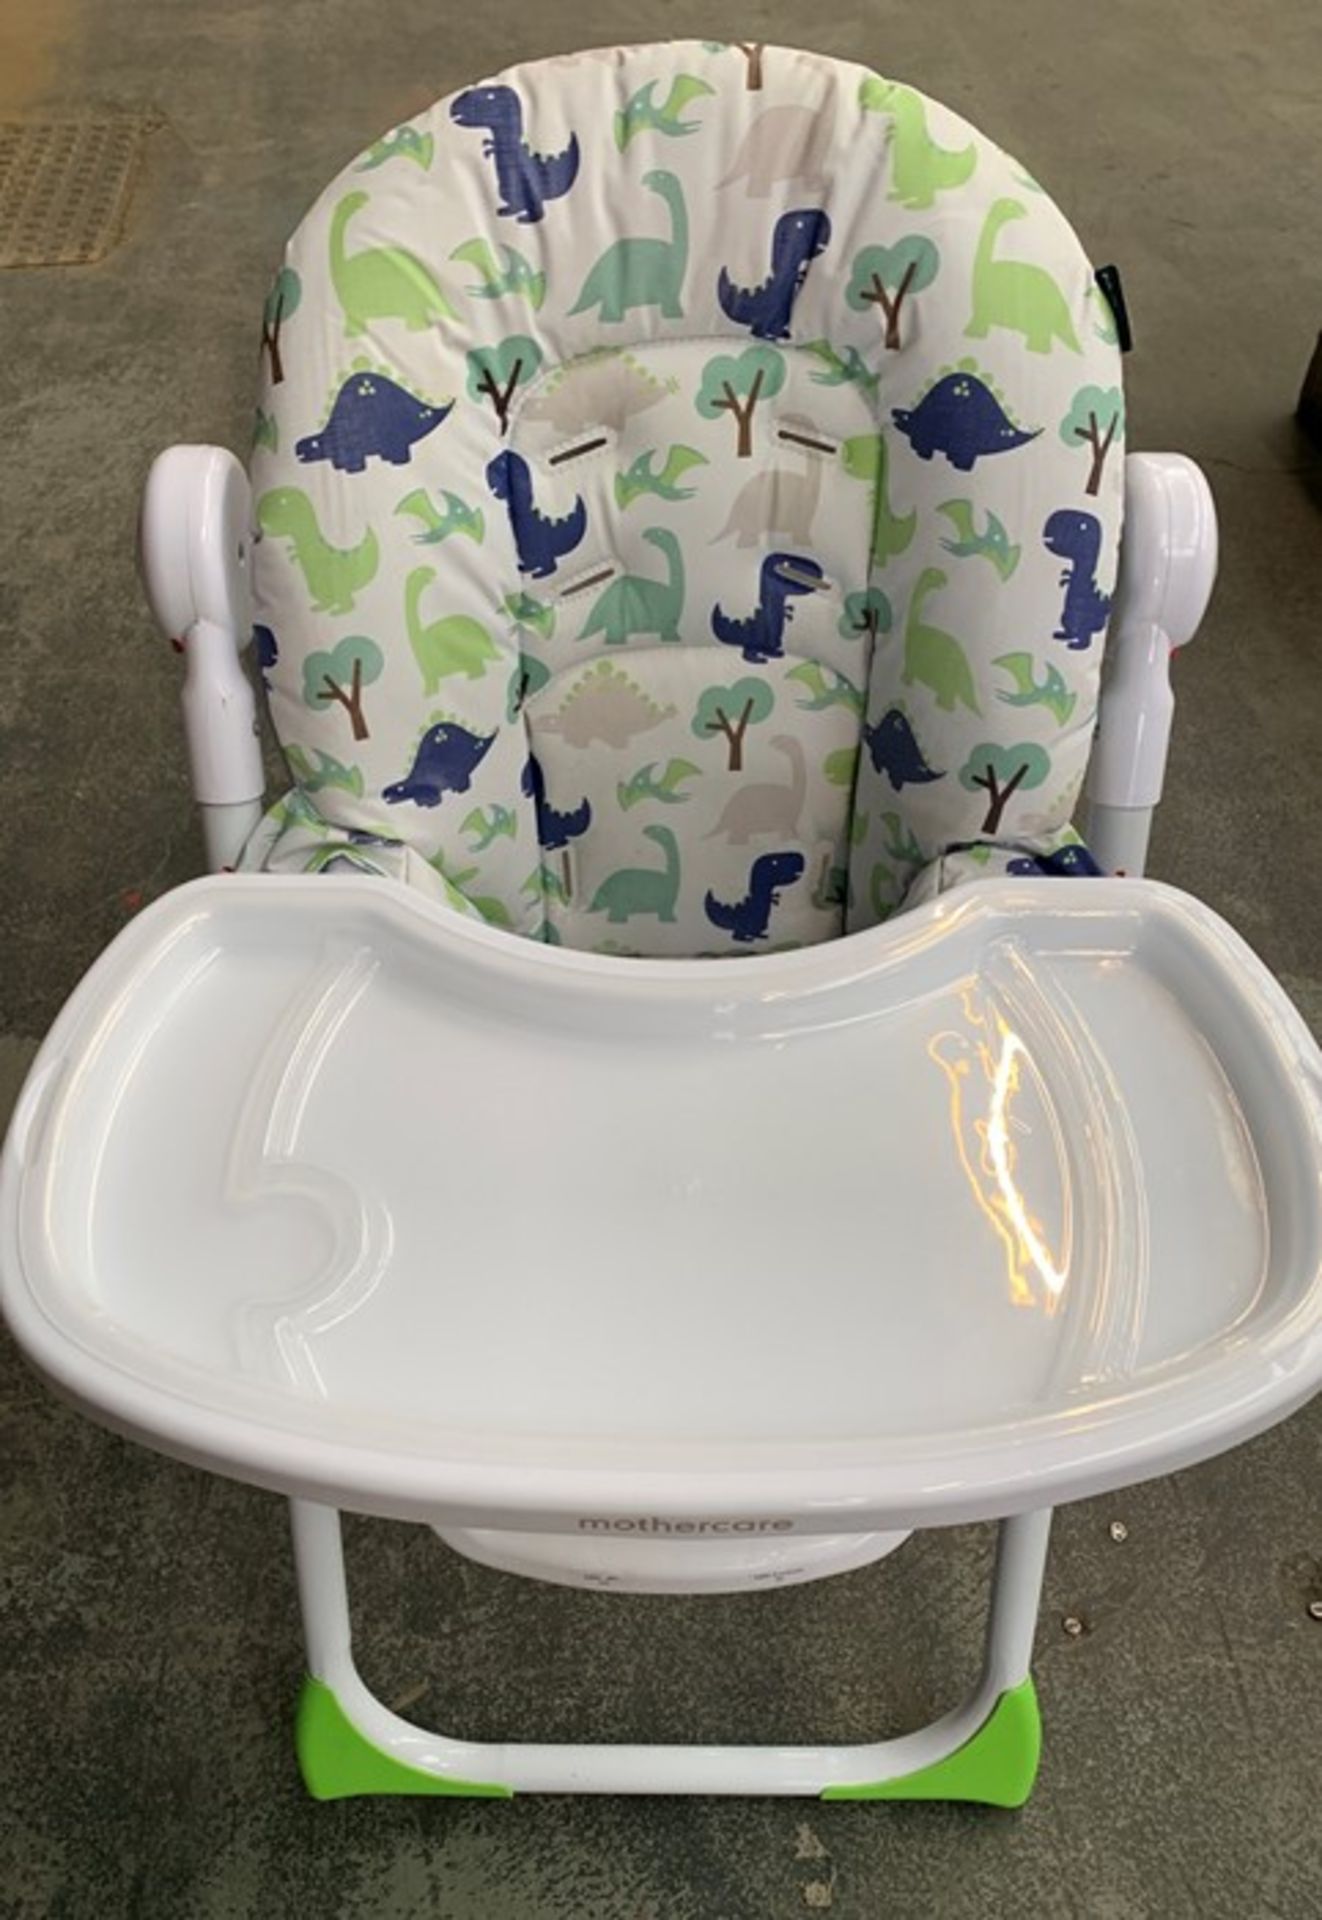 1 ASSEMBLED CARTOON DINOSAURS HIGH CHAIR IN GREEN AND WHITE / RRP £80.00 (PUBLIC VIEWING AVAILABLE)